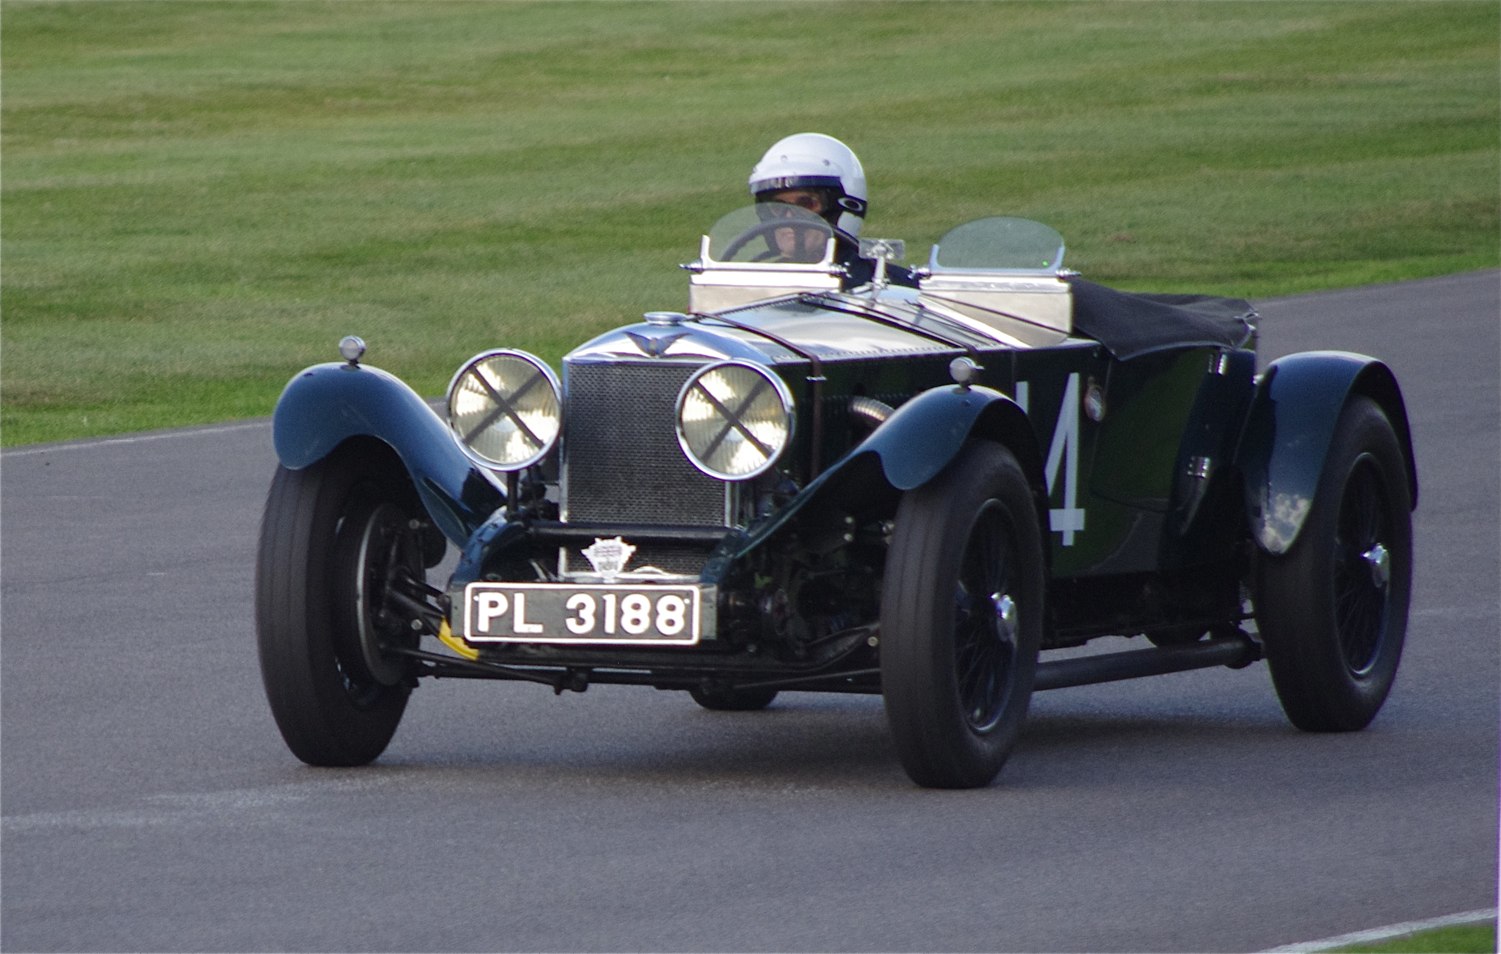 an old vintage car is driving on the track